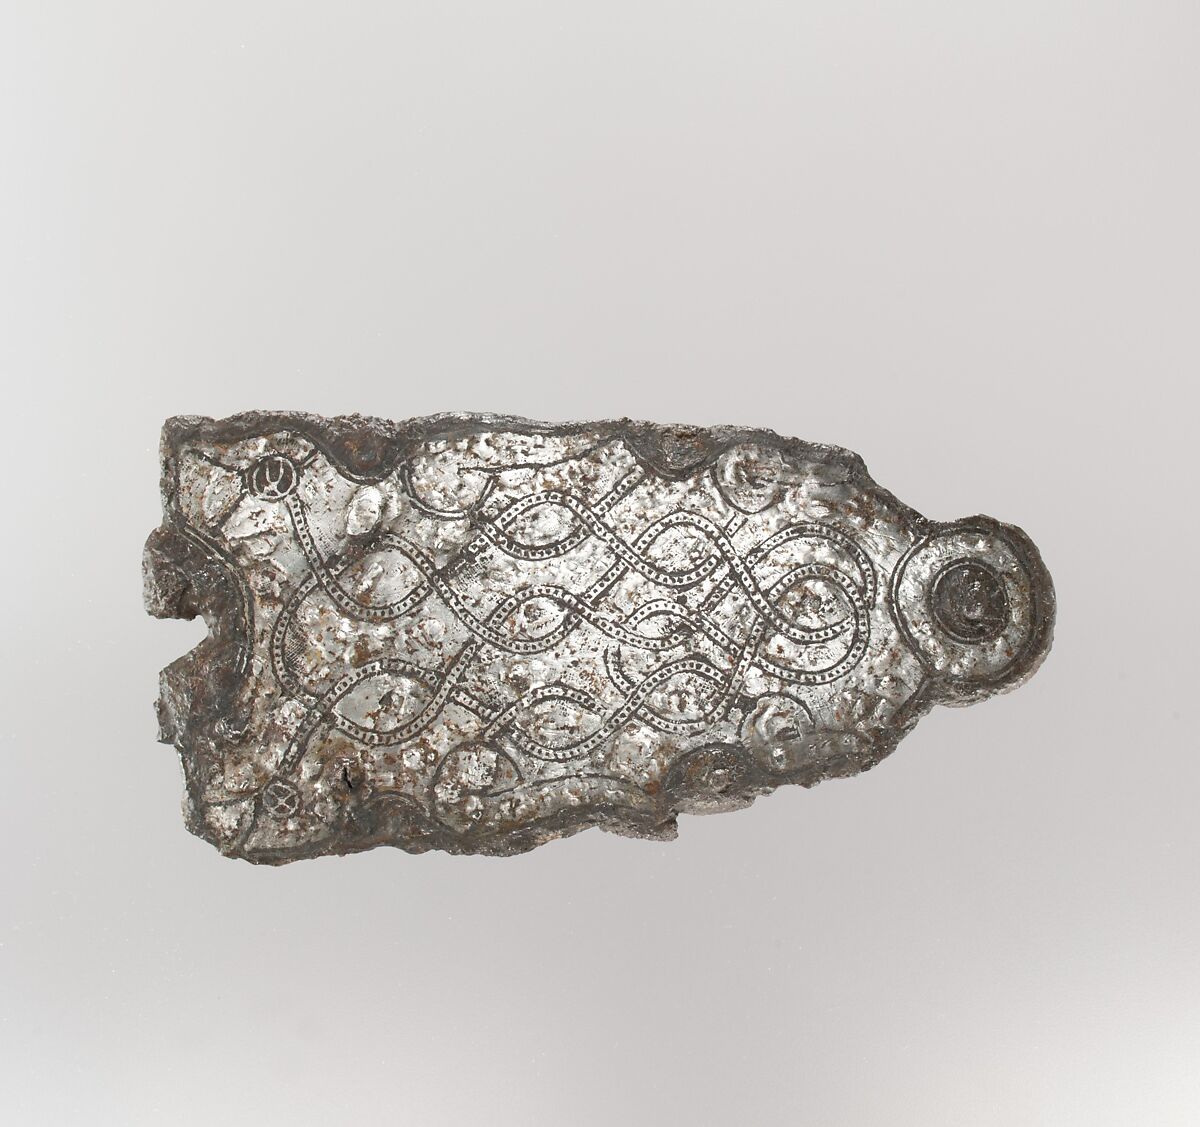 Counter Plate of a Belt Buckle, Iron, silver inlay; iron rivets, Frankish or Burgundian 